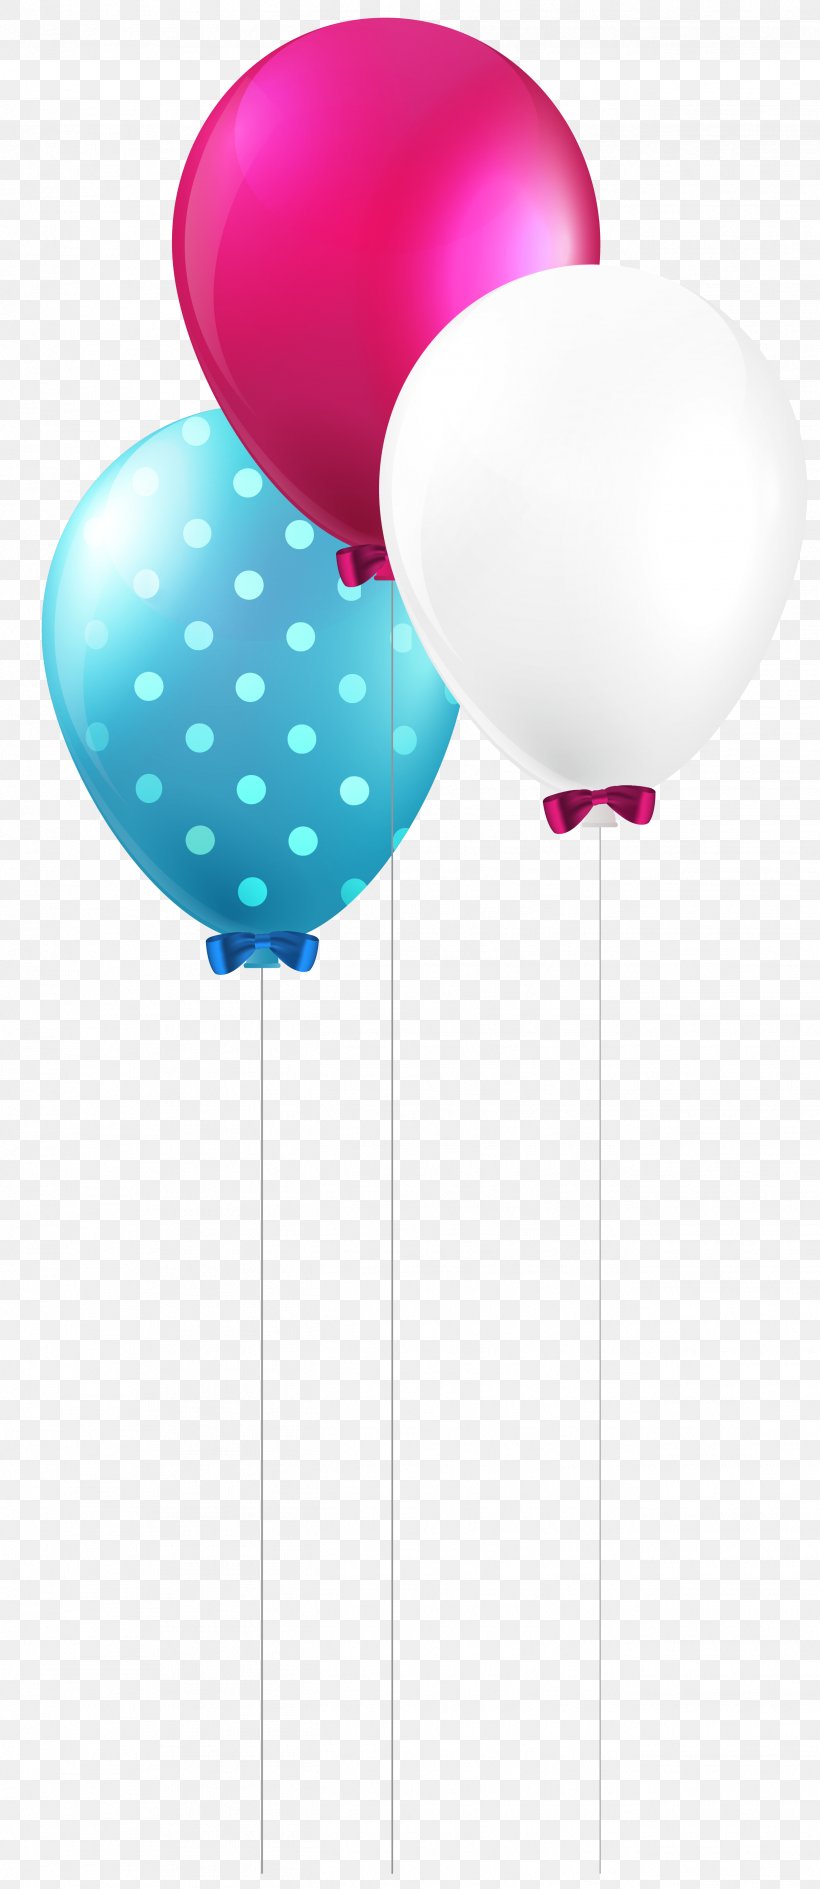 A Tale Of Five Balloons Toy Balloon Clip Art, PNG, 2631x6062px, Balloon, Birthday, Bloons Tower Defense, Gift, Party Supply Download Free